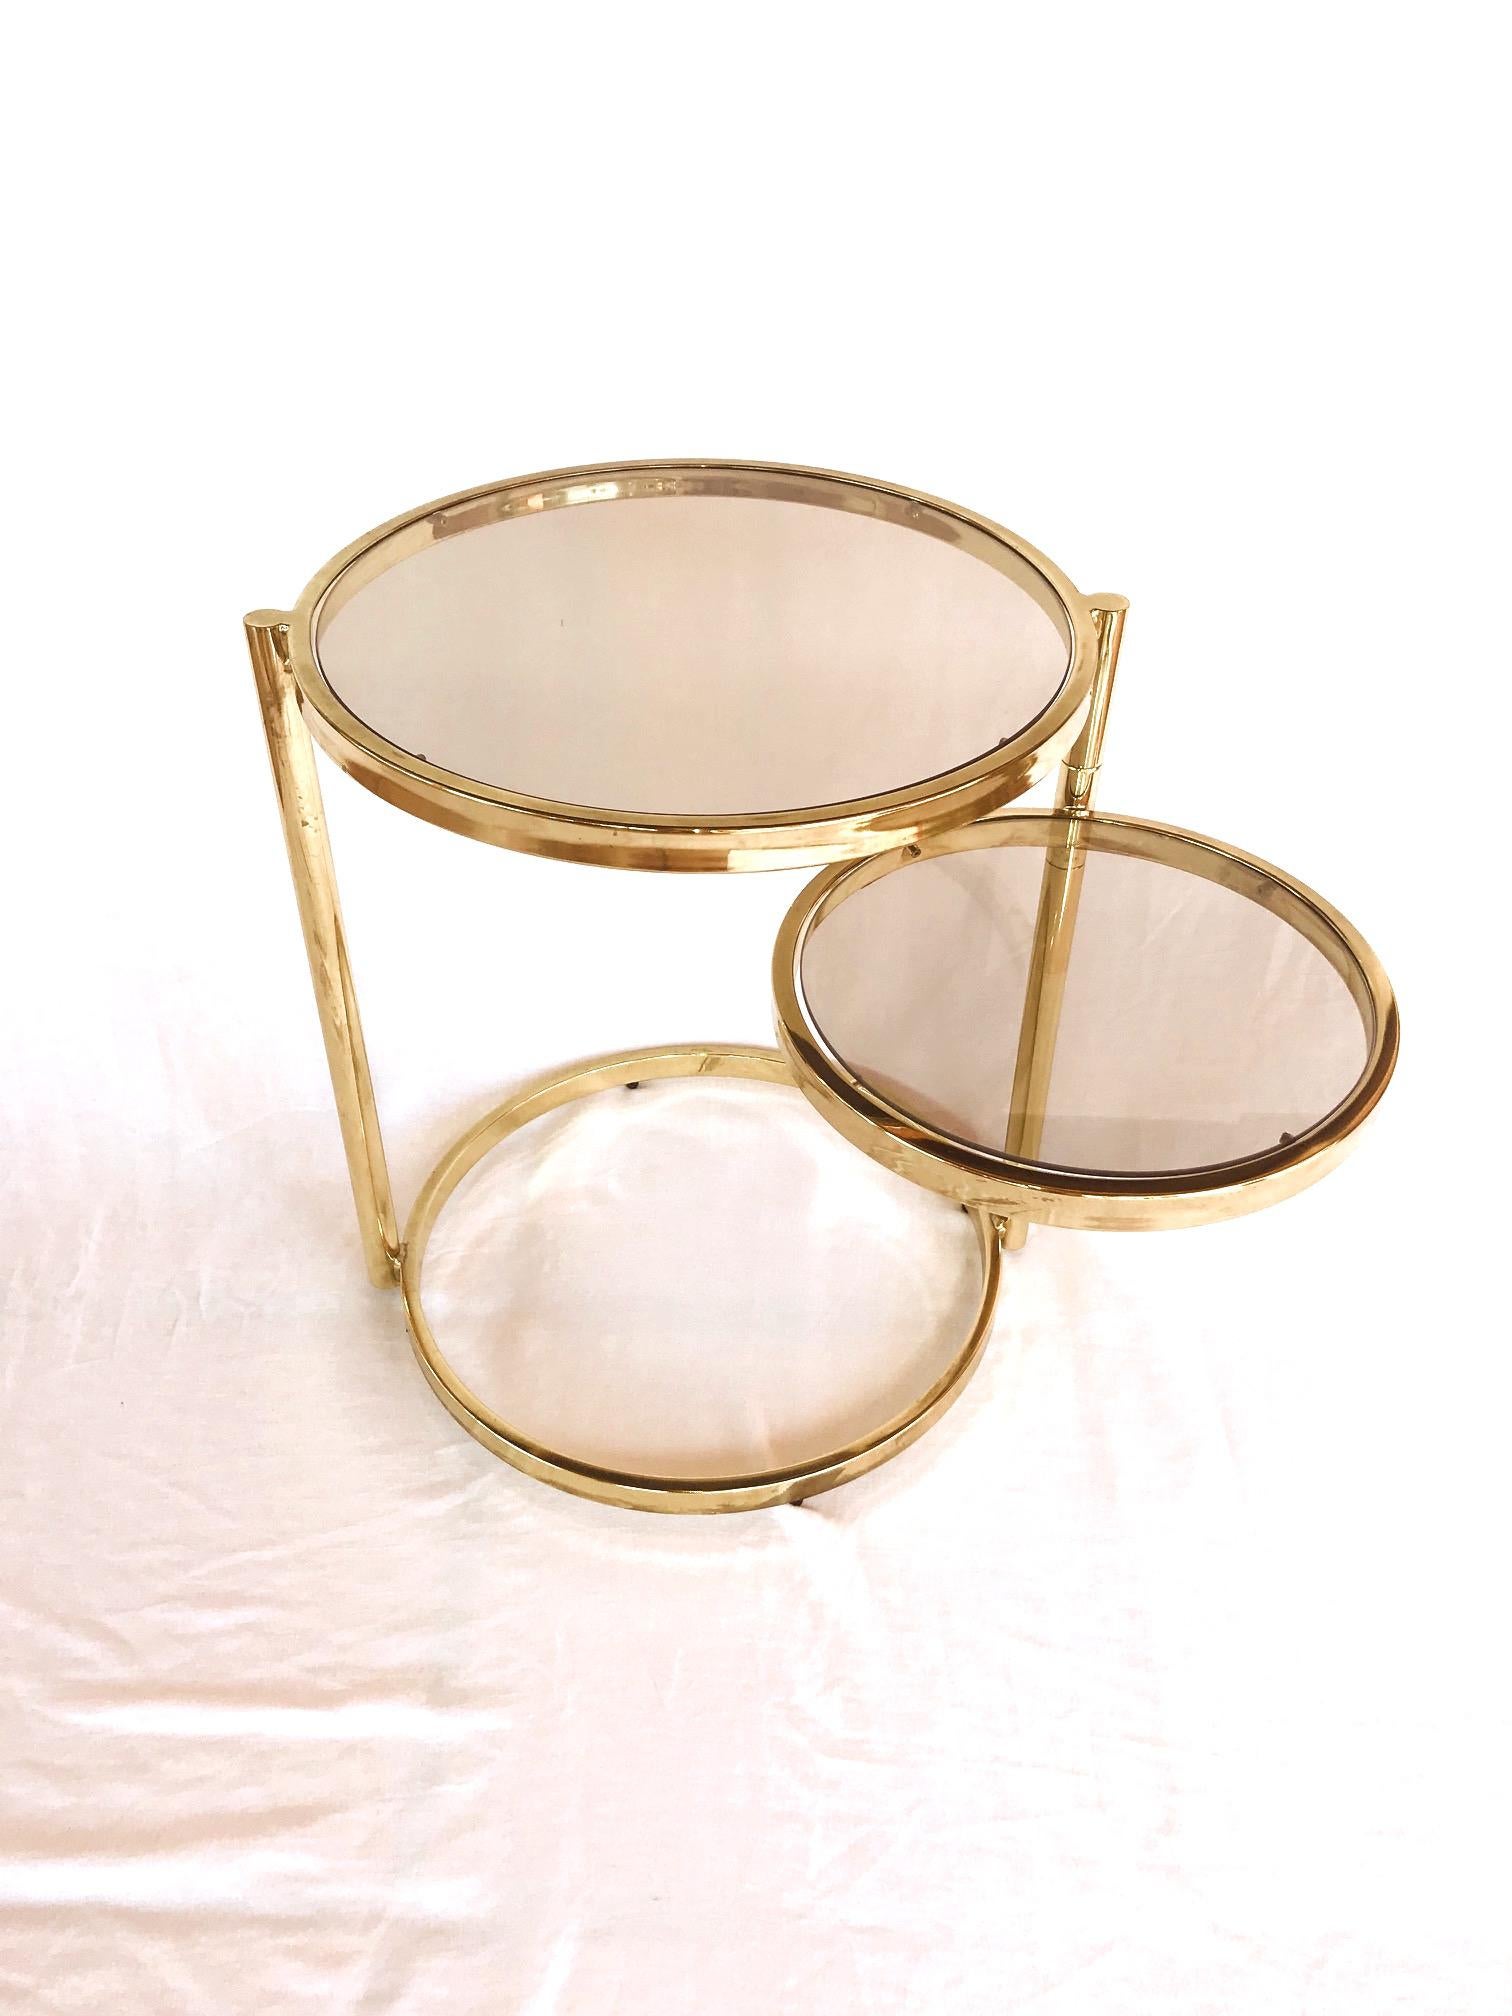 Mid-Century Modern two-tier side table with extendable top. Brass frame with adjustable and rotating second tier allowing the table diameter to extend from 19.5